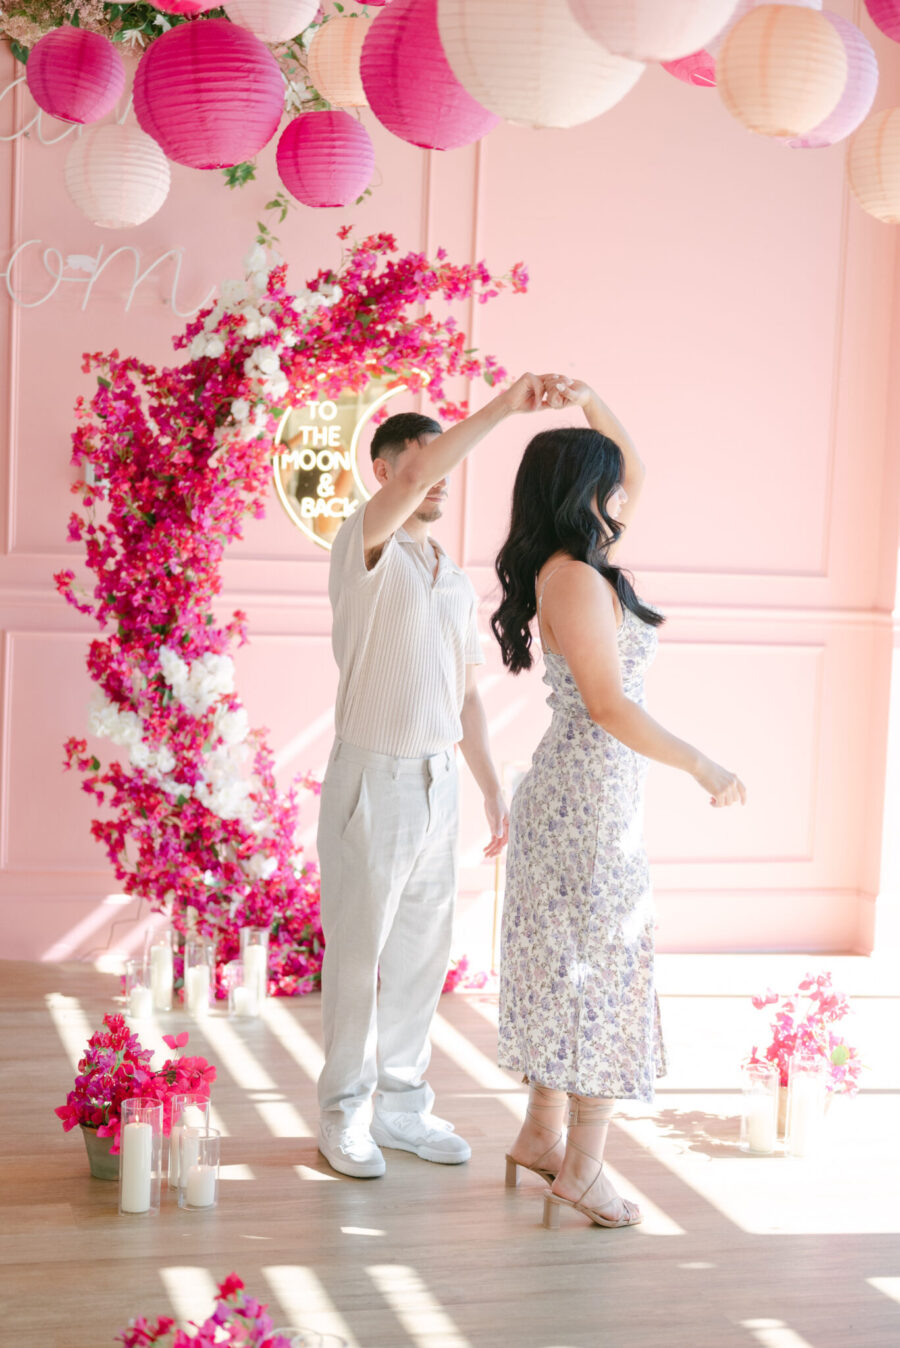 all pink proposal pink flower arch asymmetrical flower arch moon proposal to the moon and back sign luxury proposal the yes girls couple dancing